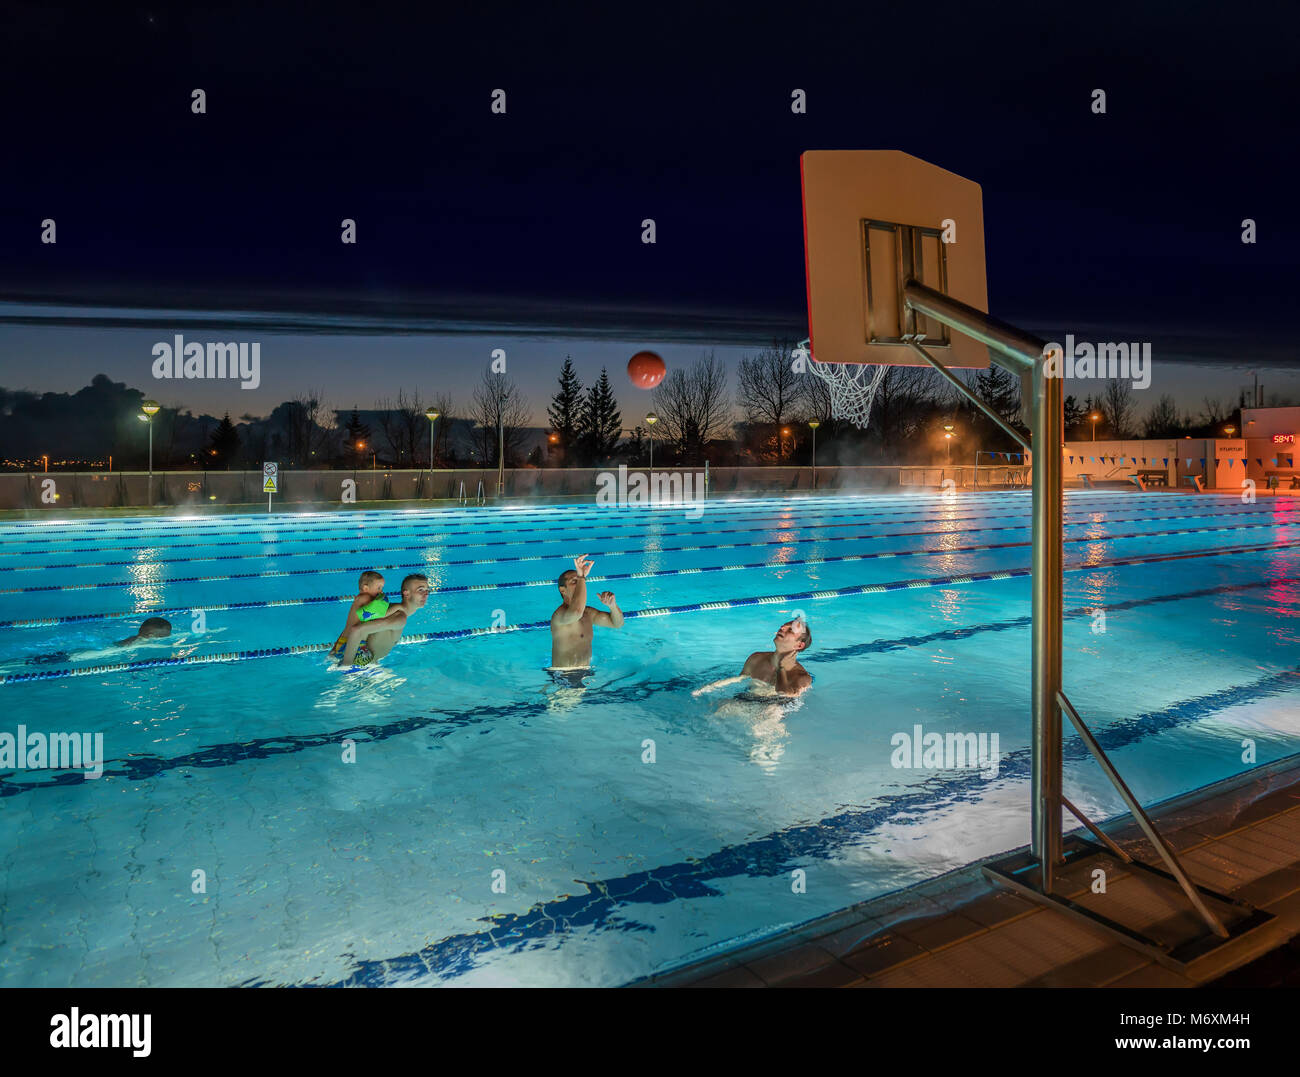 Playing basketball in a swimming pool, Iceland Stock Photo